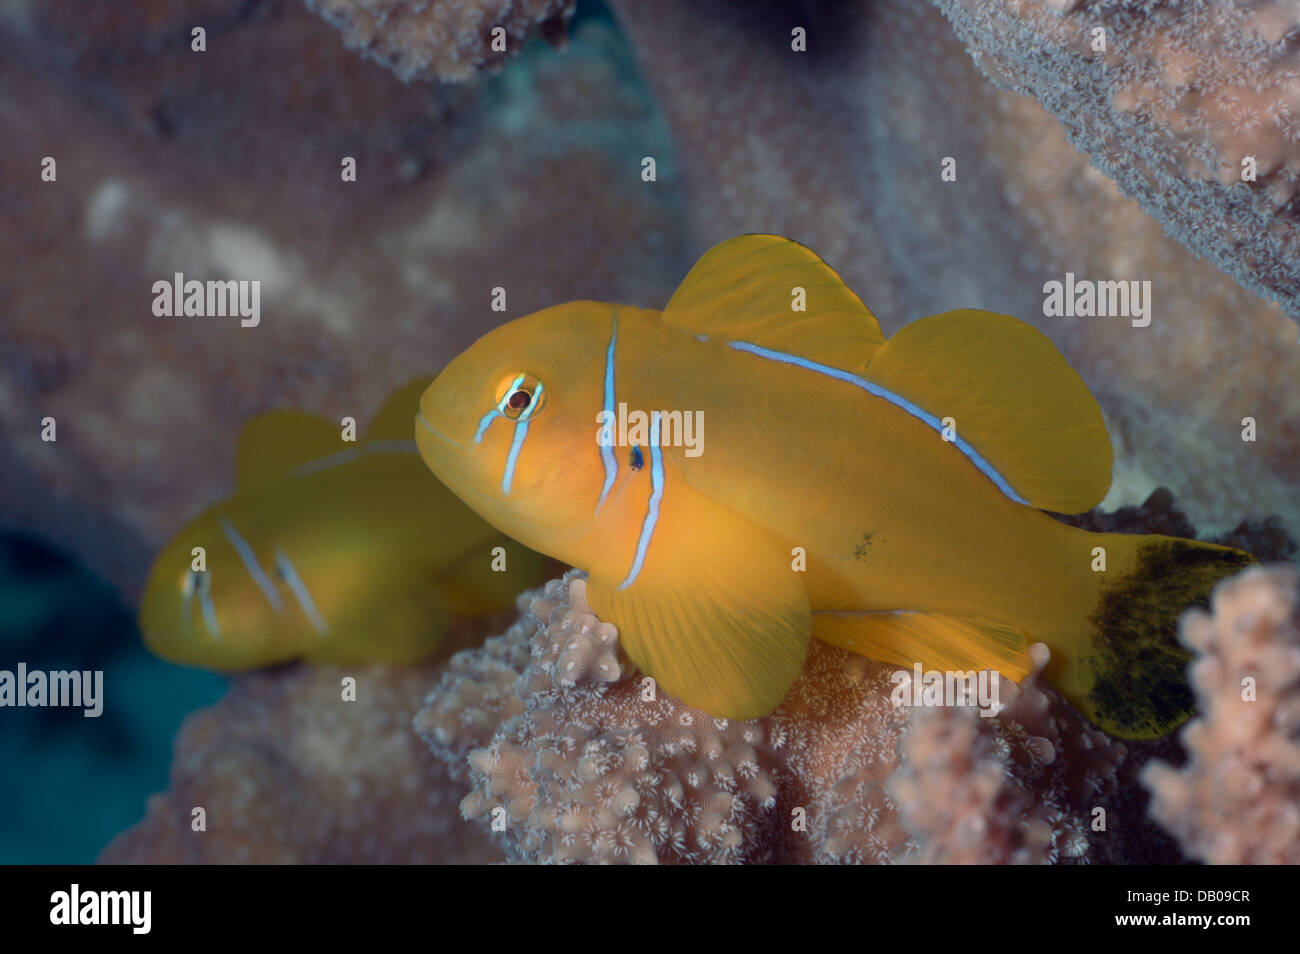 Lemon goby with black tail and a baby lemon goby sits on the hard Acropora coral. Stock Photo